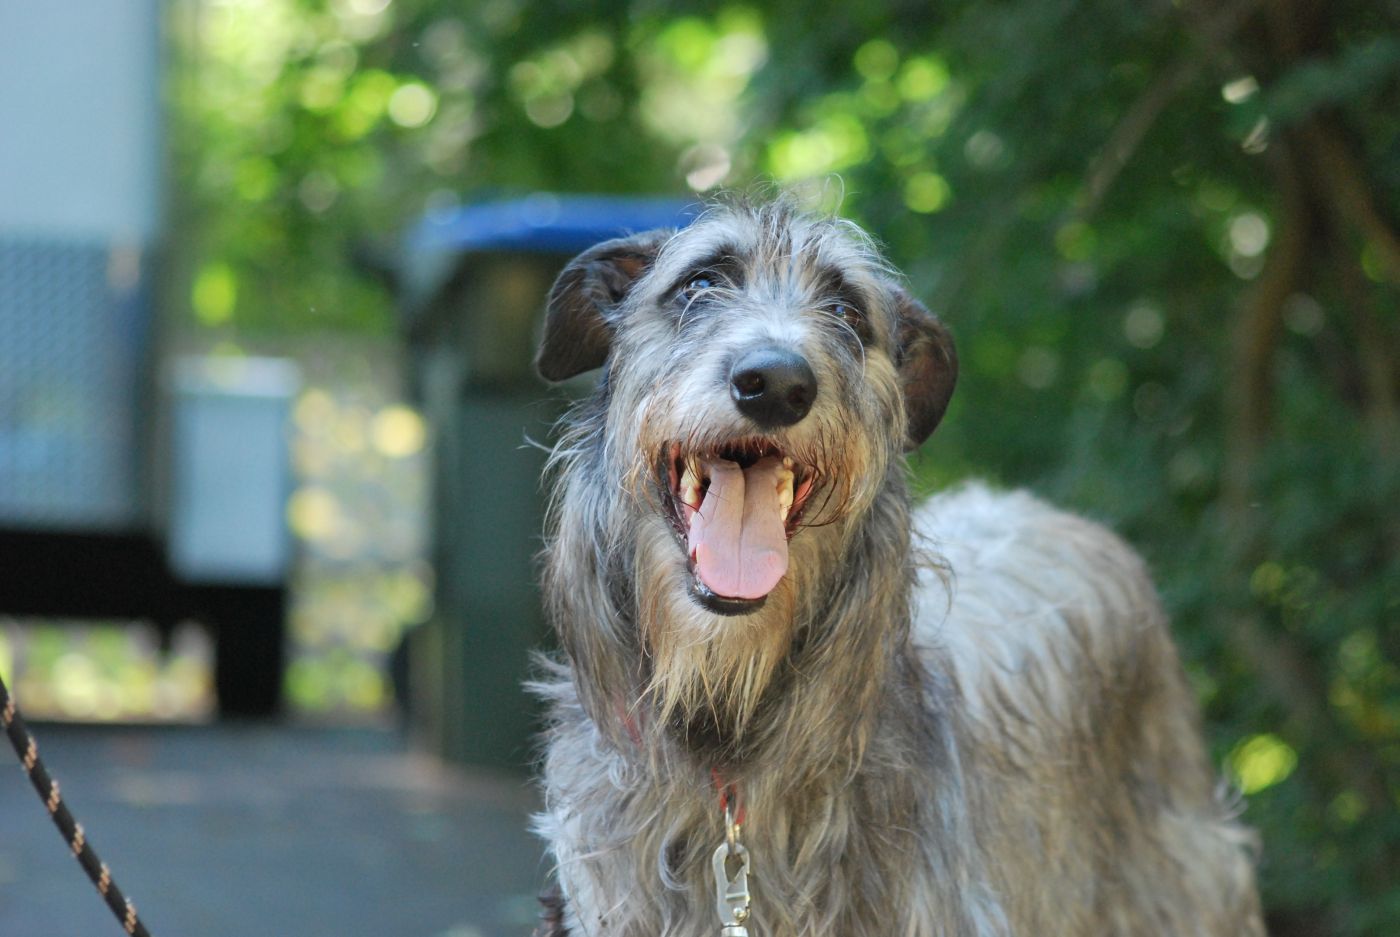 Scottish Deerhounds are an Ancient Breed